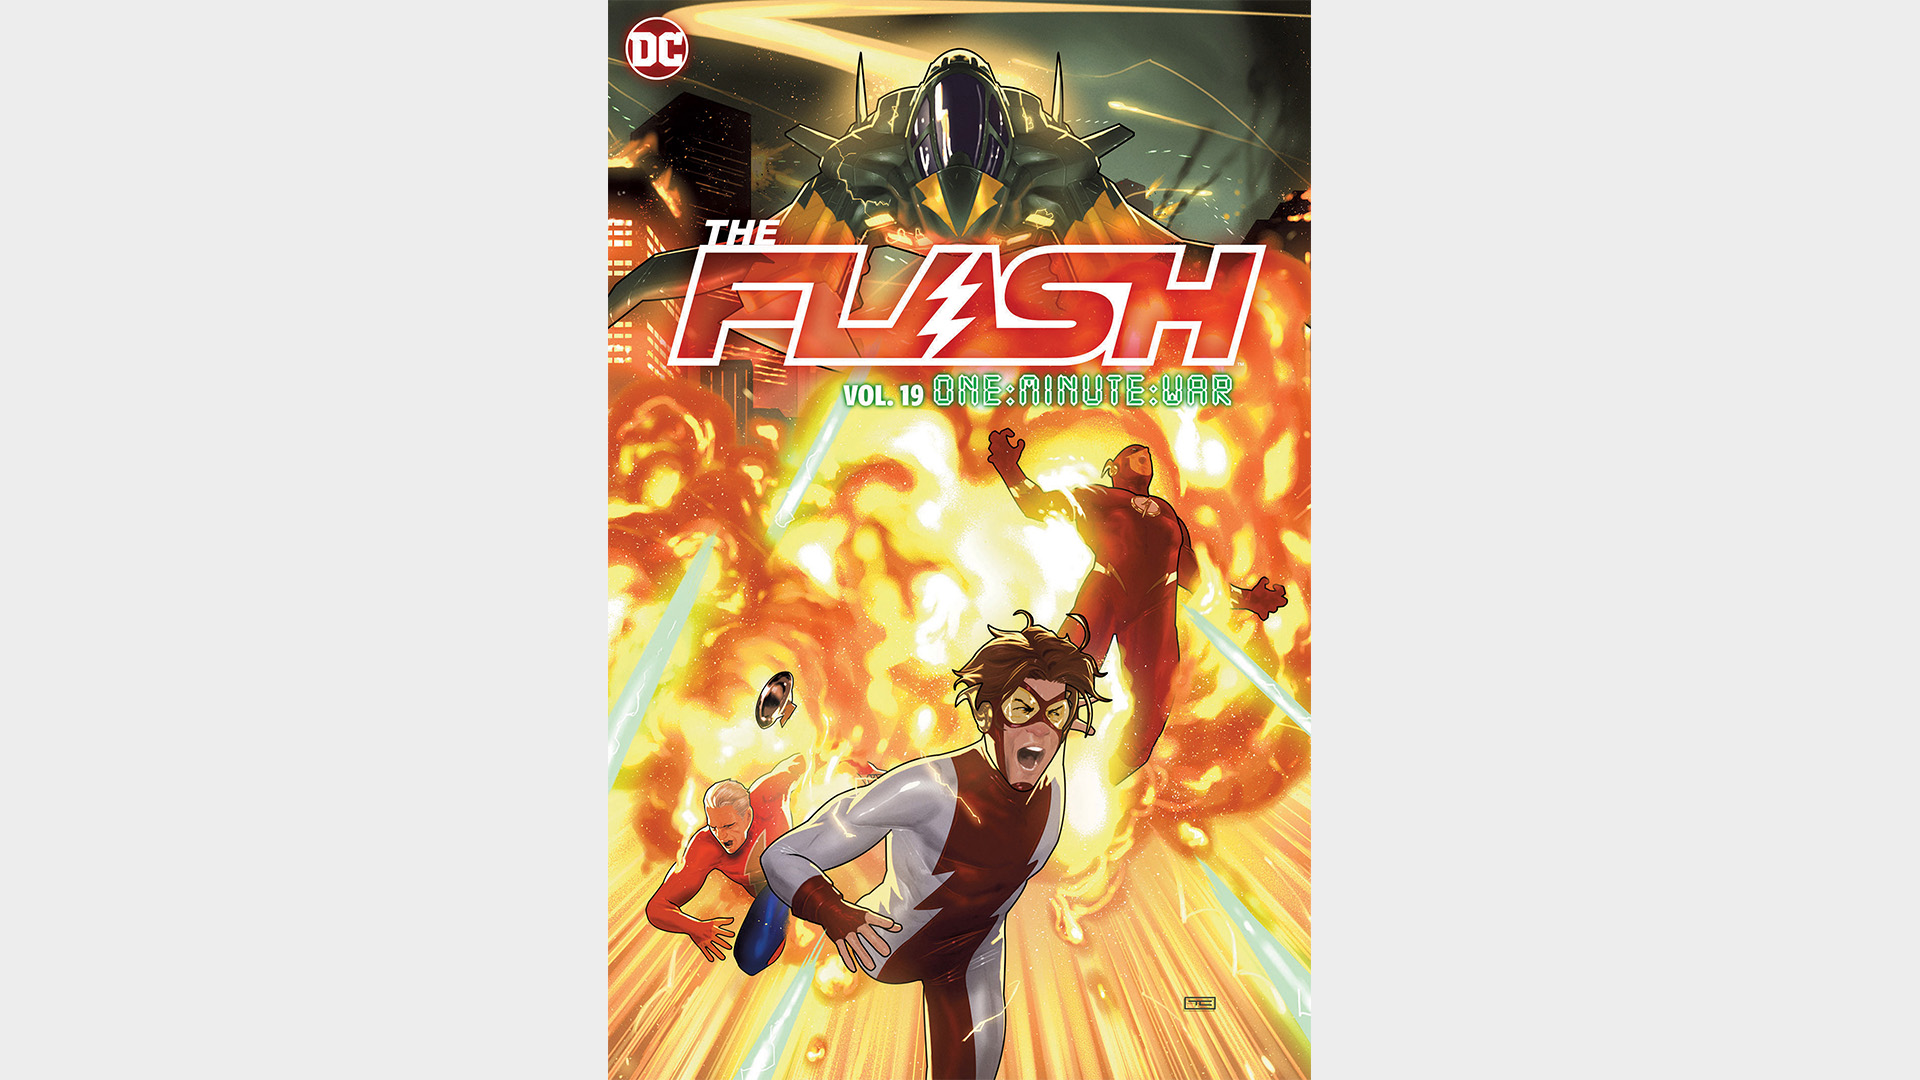 THE FLASH VOL. 19 : THE ONE-MINUTE WAR